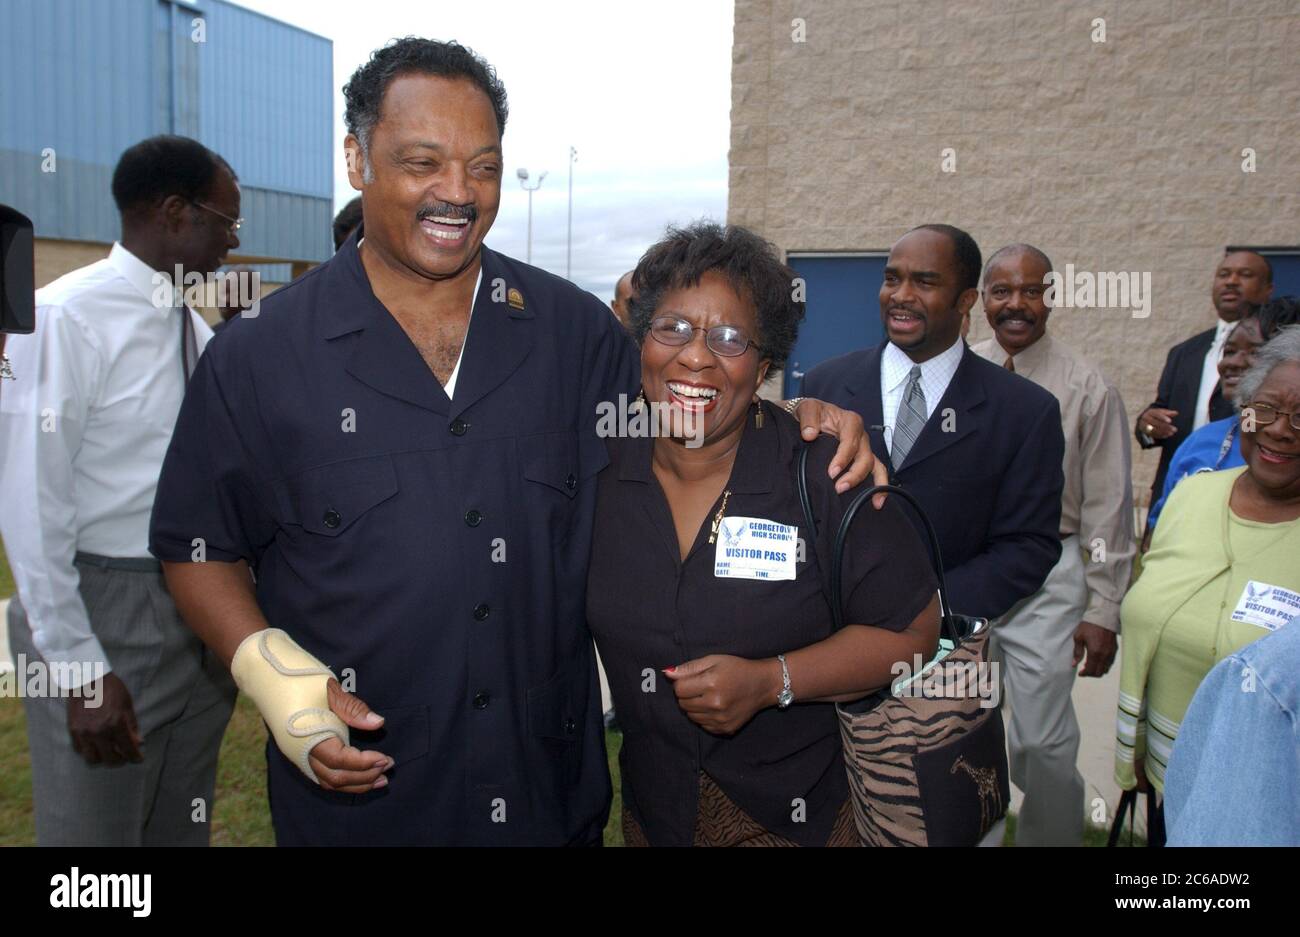 Georgetown, Texas USA, September 12, 2003: Civil rights activist Rev. Jesse Jackson greets Black supporters during visit to Georgetown High School. ©Bob Daemmrich Stock Photo